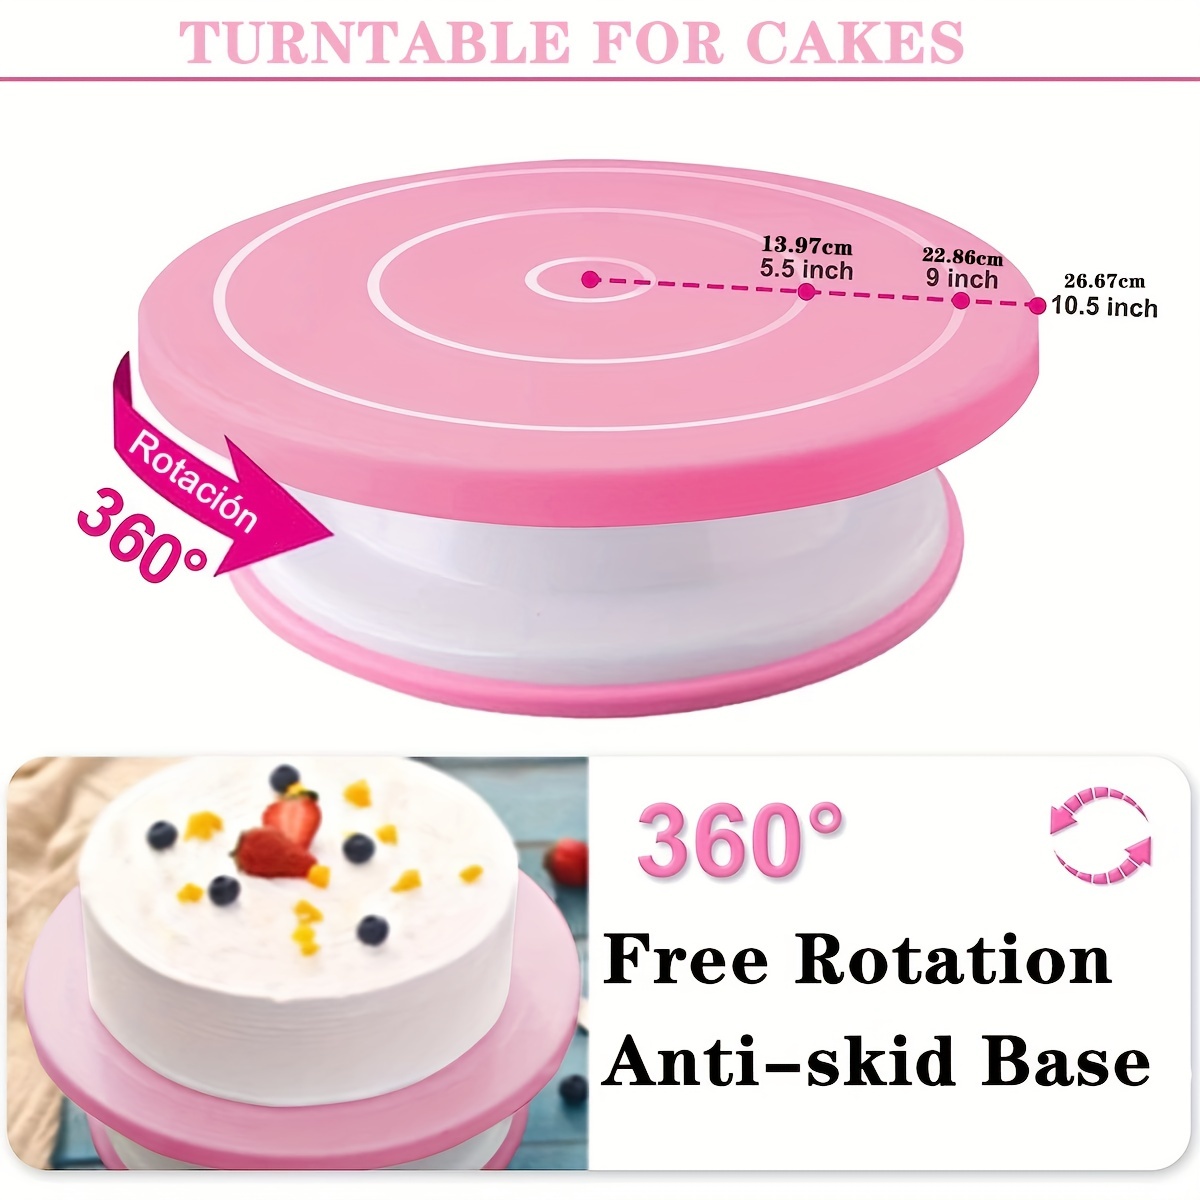 Cake Stand, 10 Inch Round Aluminum Revolving Cake Decorating Stand  Revolving Cake Turntable for Home Cake Decorating Supplies (Pink)